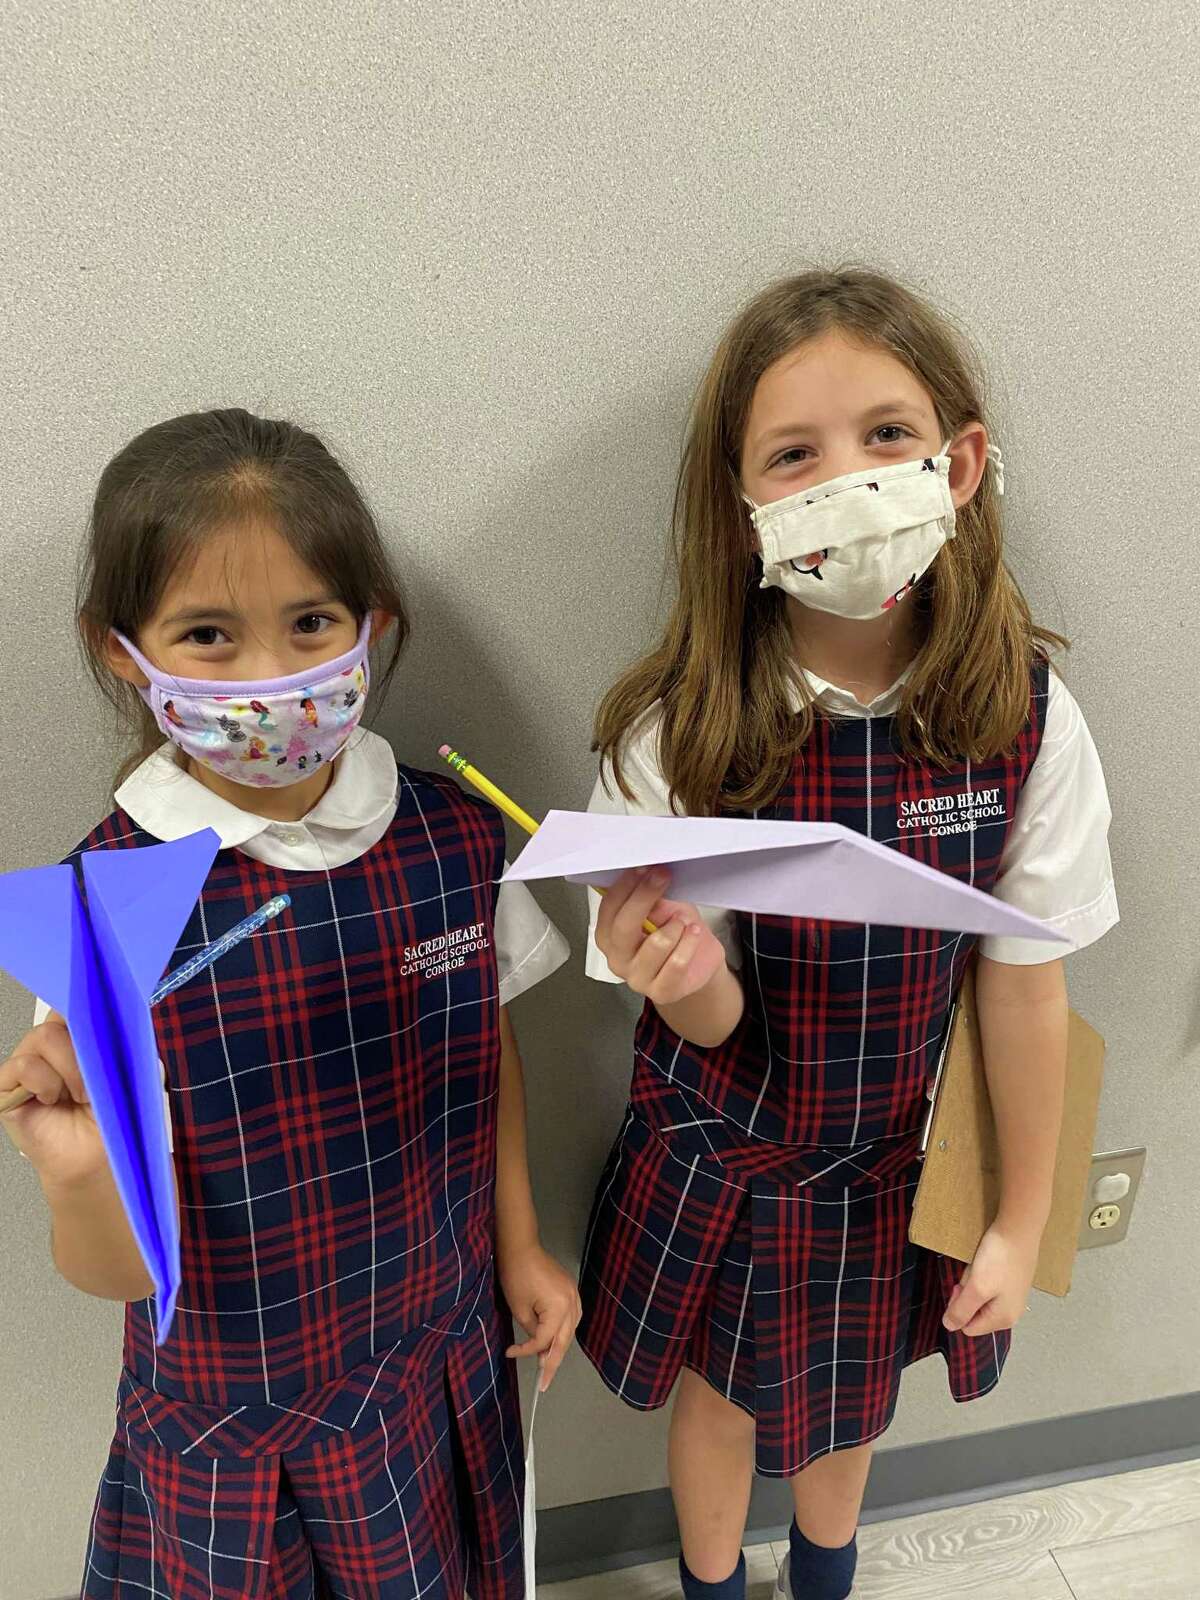 Second graders Ally Gonzales and Anna Beth Lee discover how to apply the scientific method during a S.T.R.E.A.M. (Science, Technology, Religion, Engineering, Art, and Math) activity with airplanes during Catholic Schools Week at Sacred Heart Catholic School.